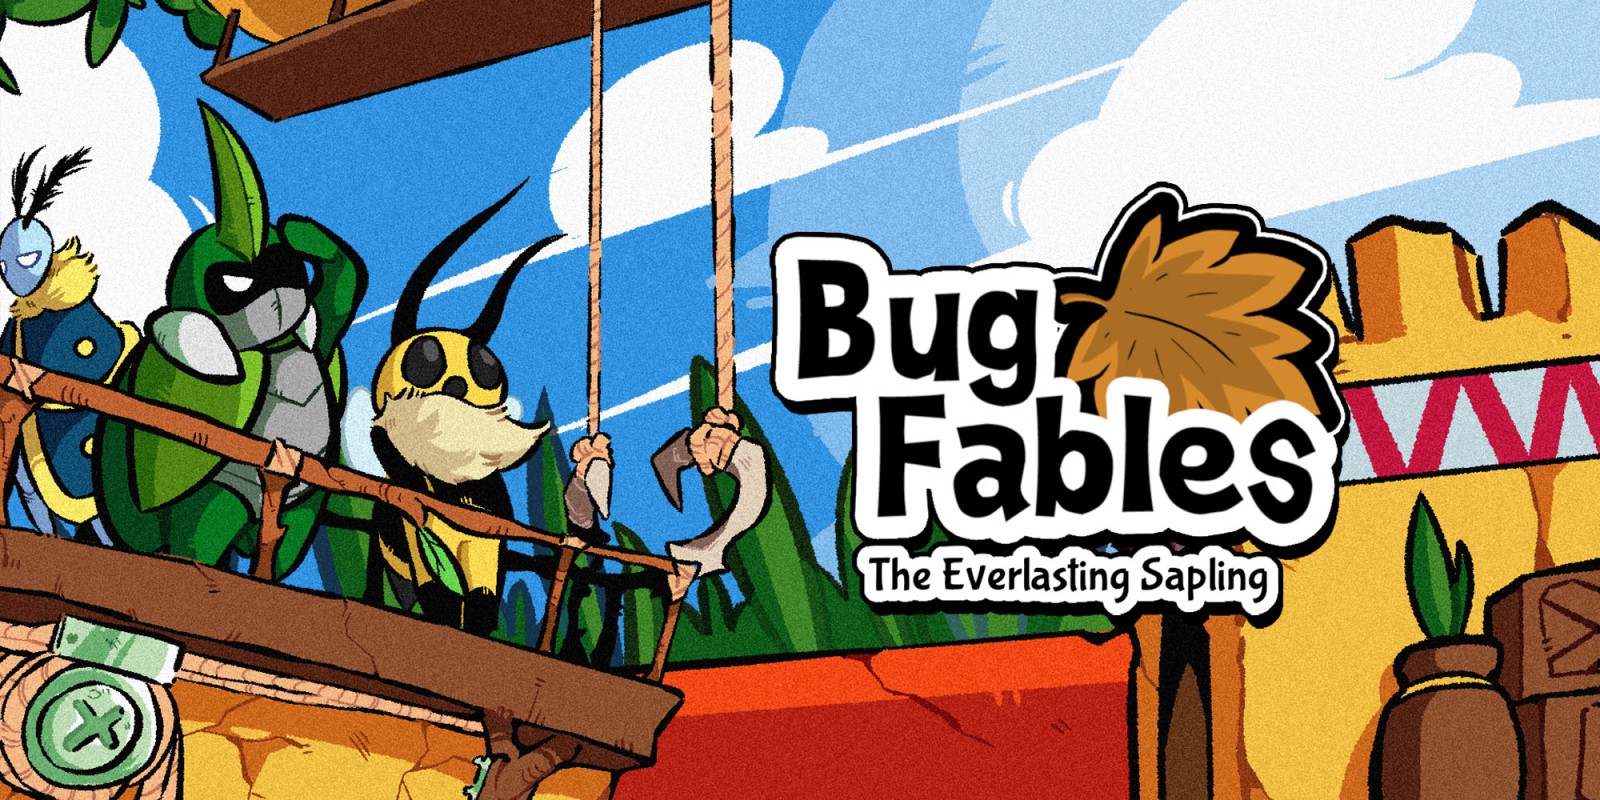 Bug Fables -The Everlasting Sapling- free downloads